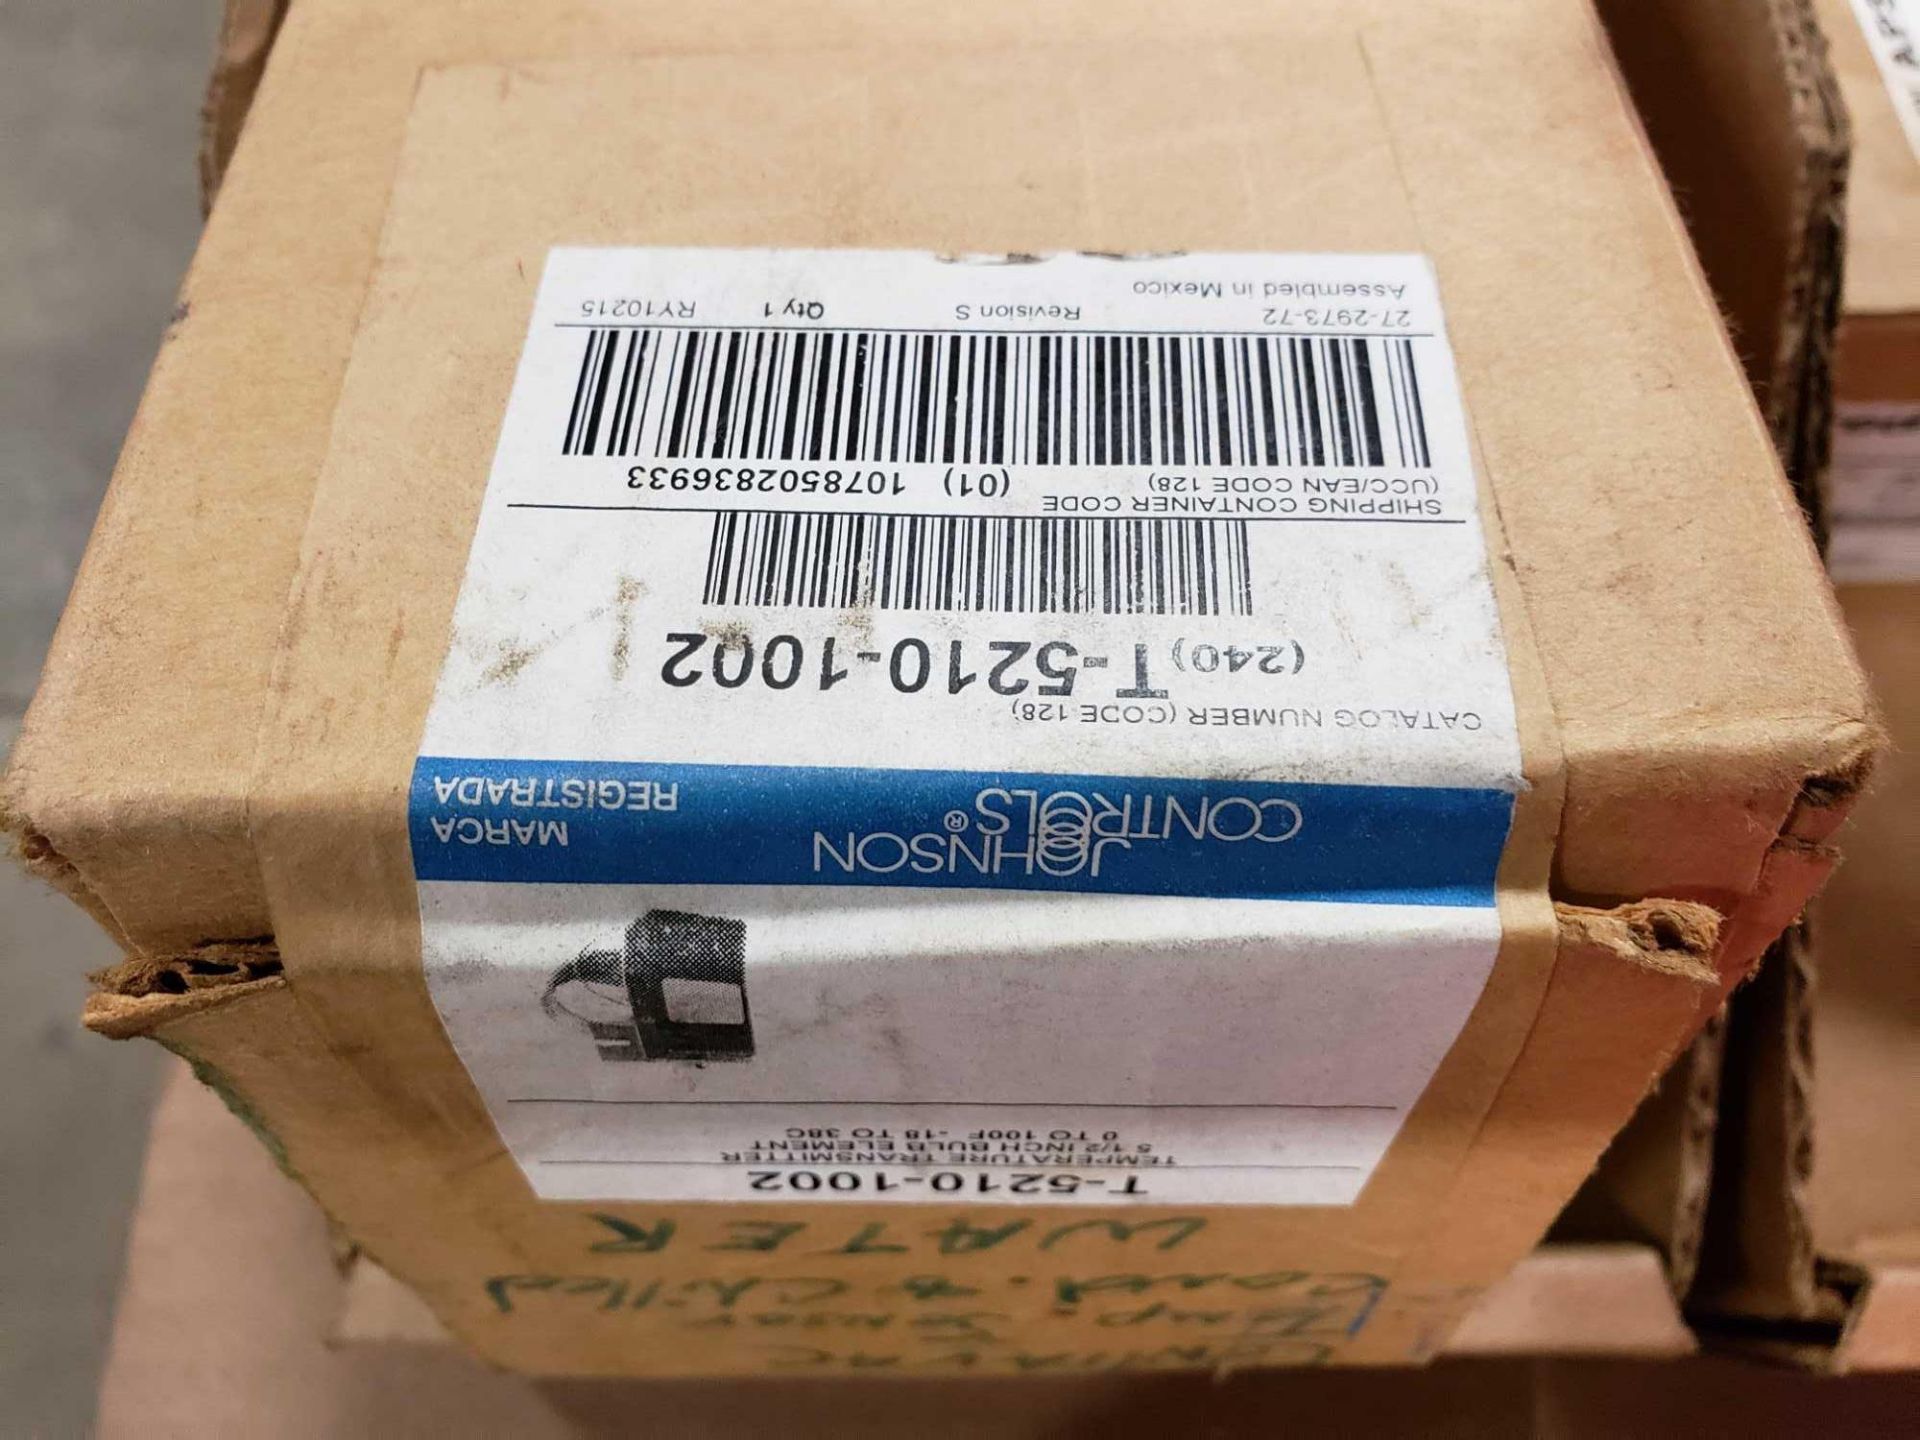 Johnson Controls model T-5210-1002. New in box. - Image 2 of 2